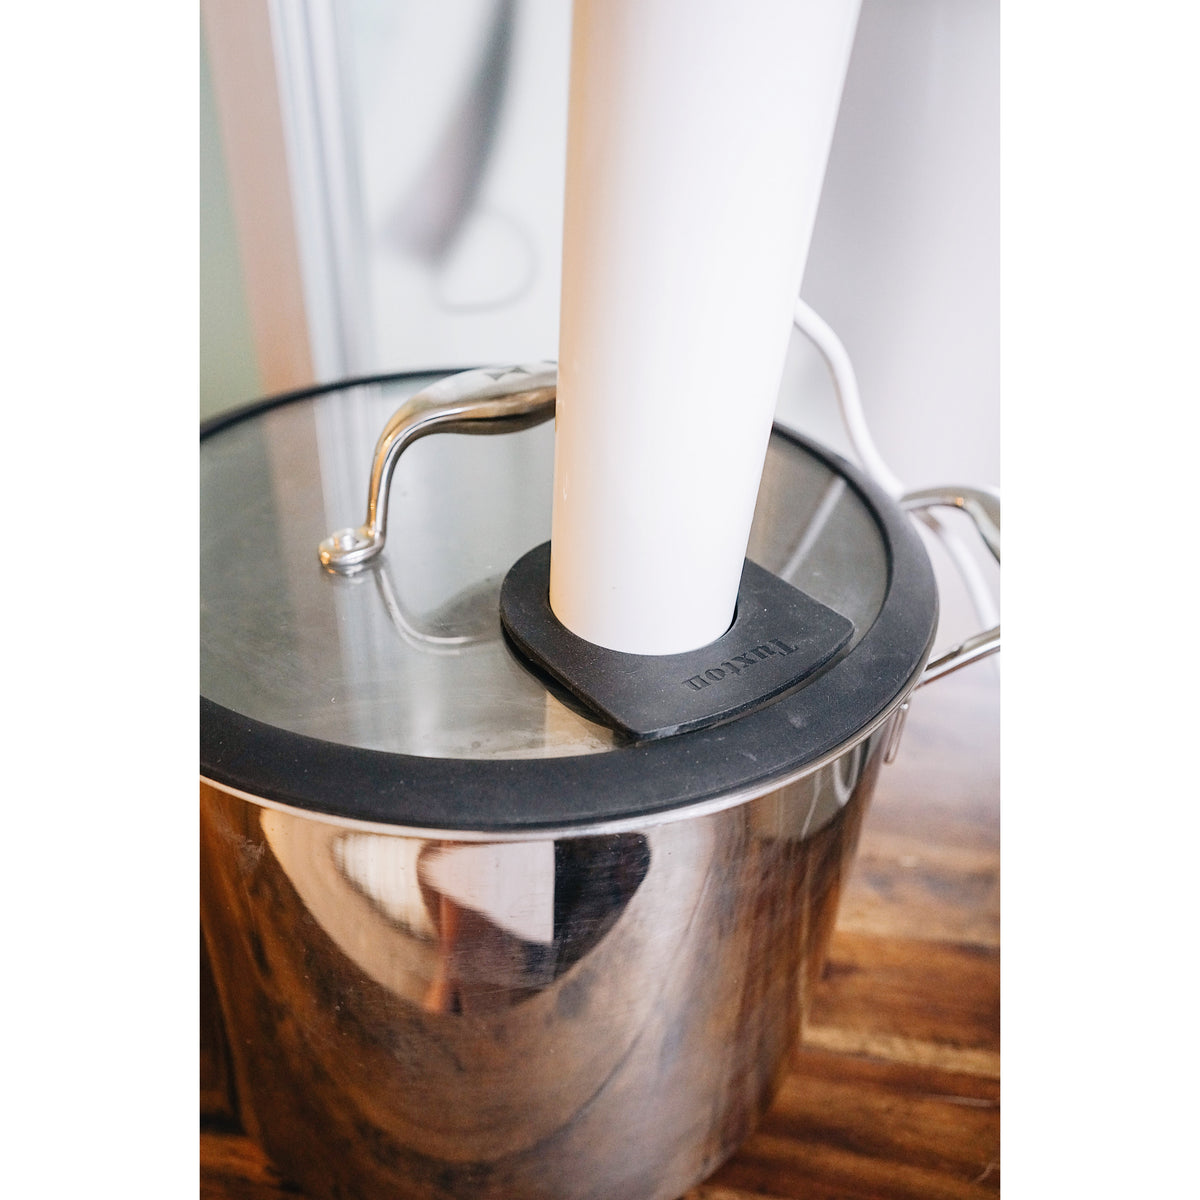 Chef Series Joule Sous Vide Adapter by Tuxton Home